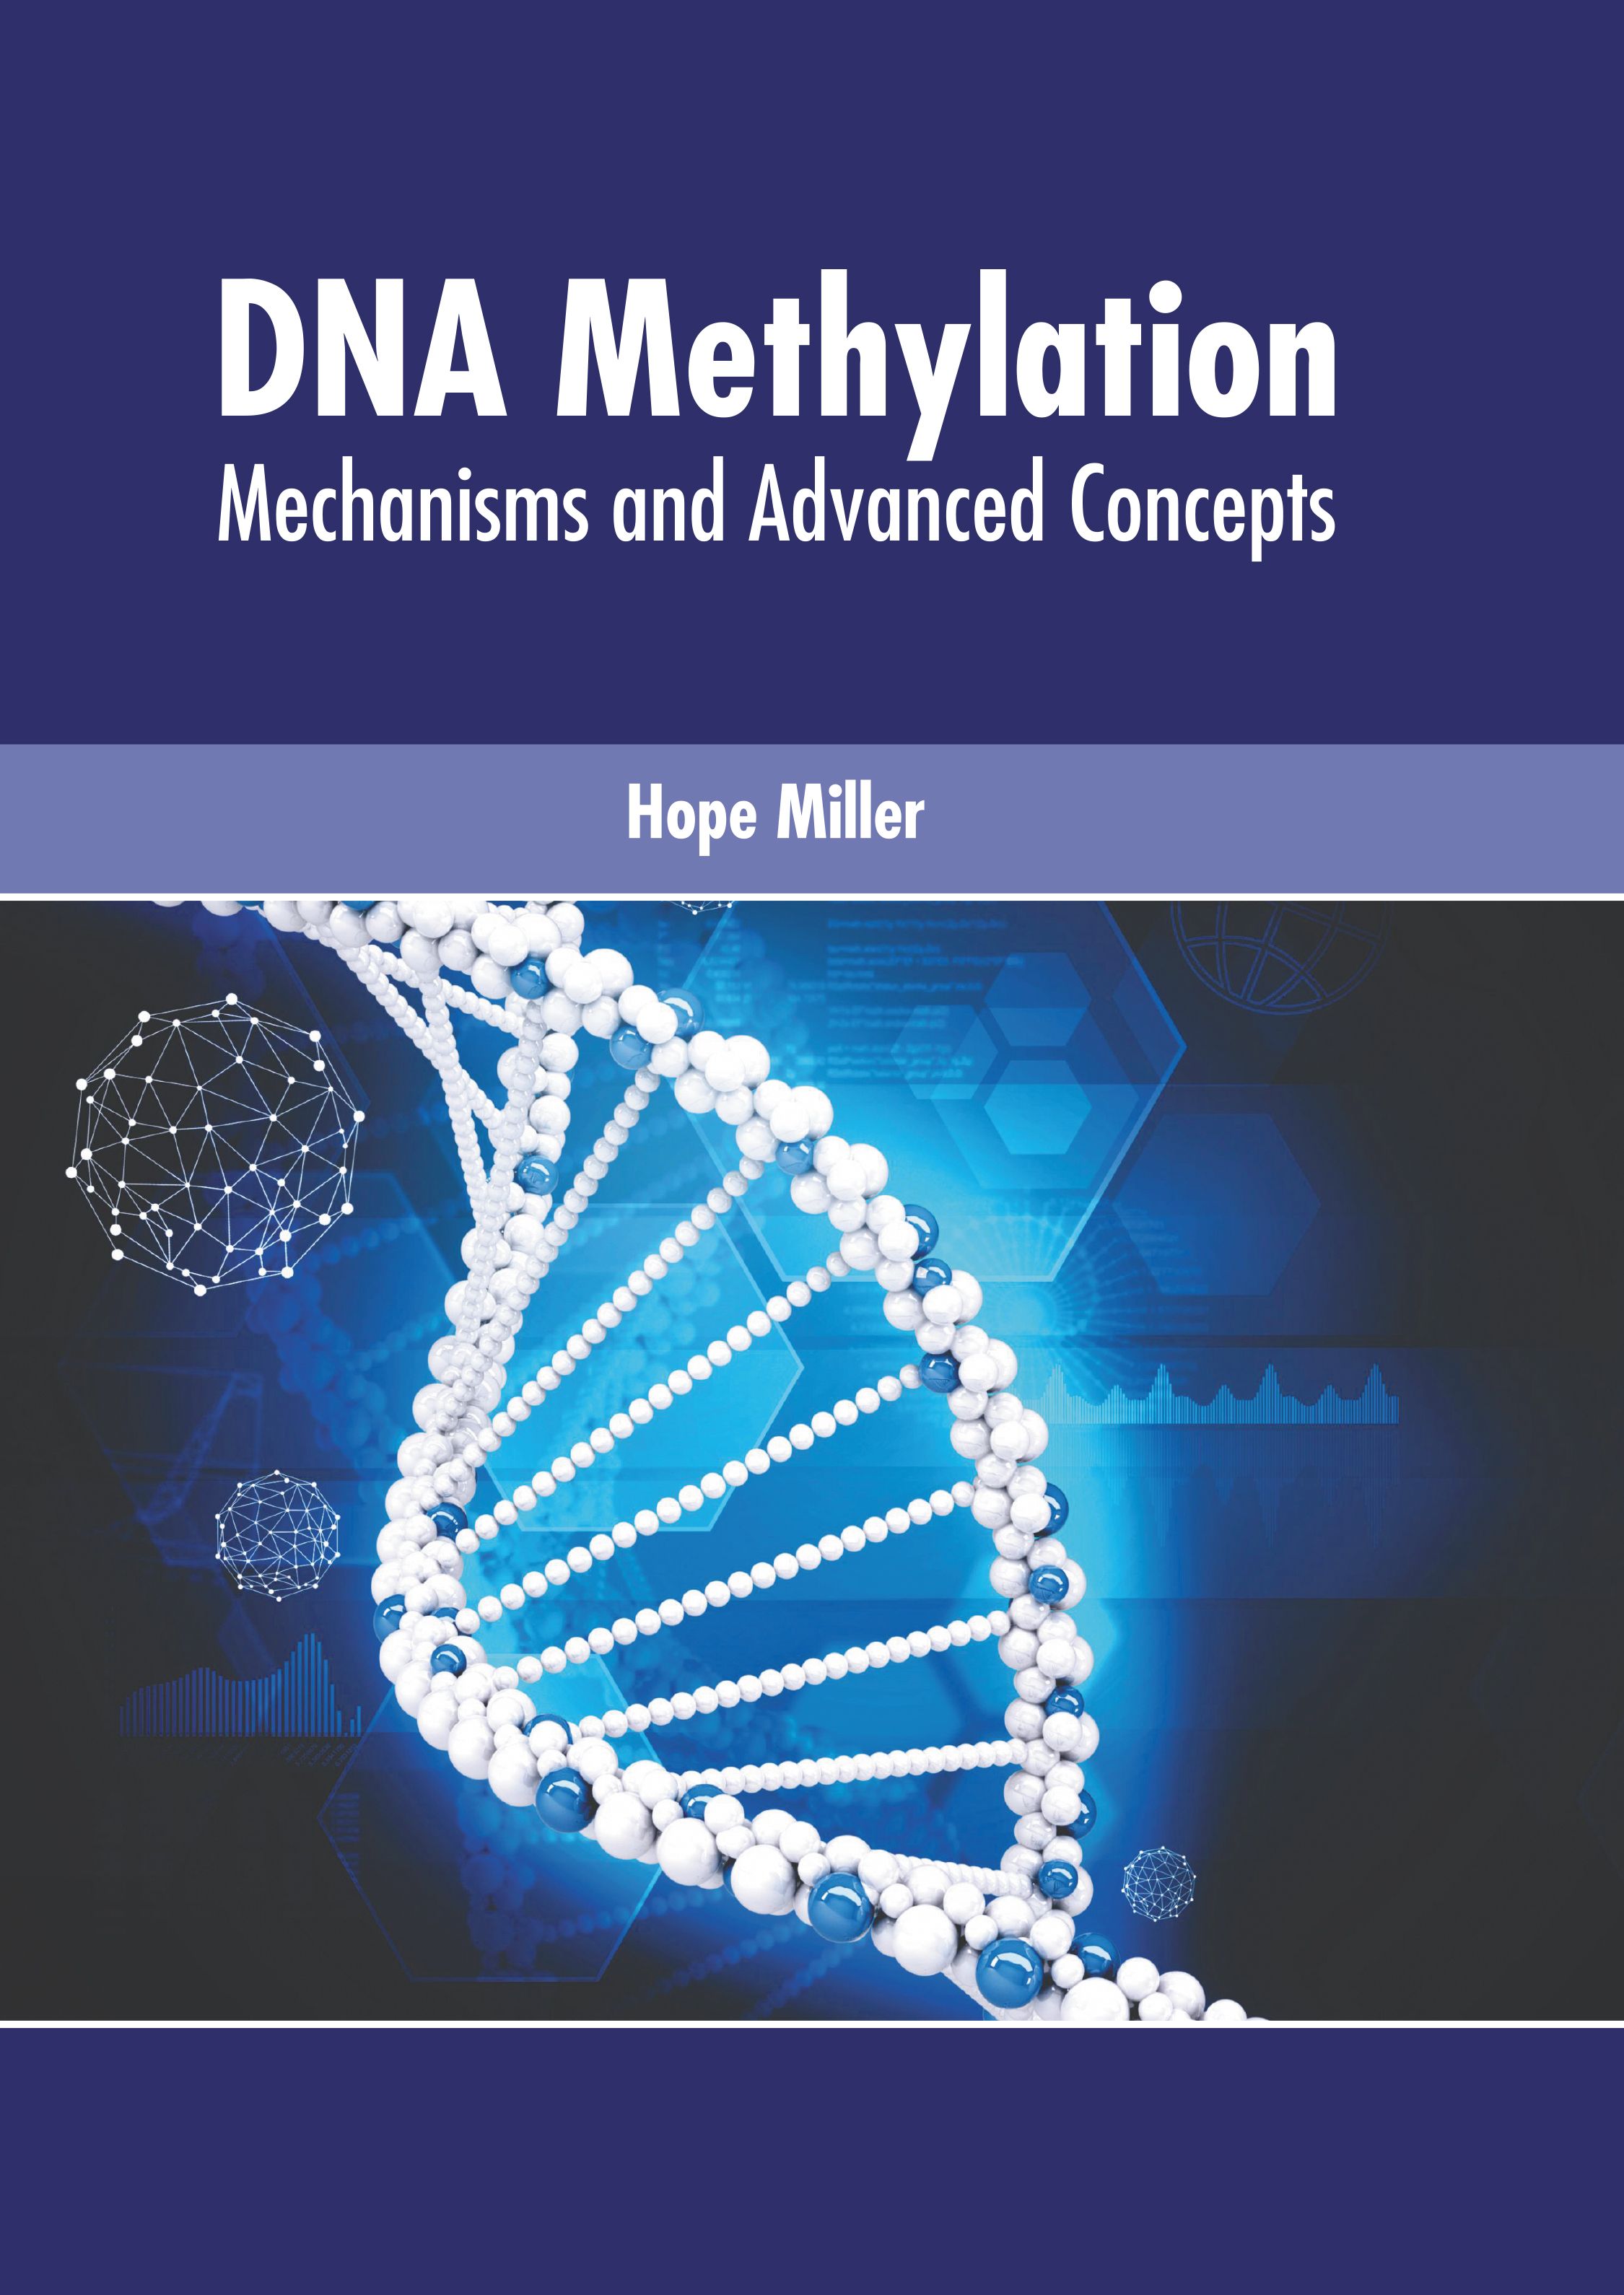 

exclusive-publishers/american-medical-publishers/dna-methylation-mechanisms-and-advanced-concepts-9781639272488